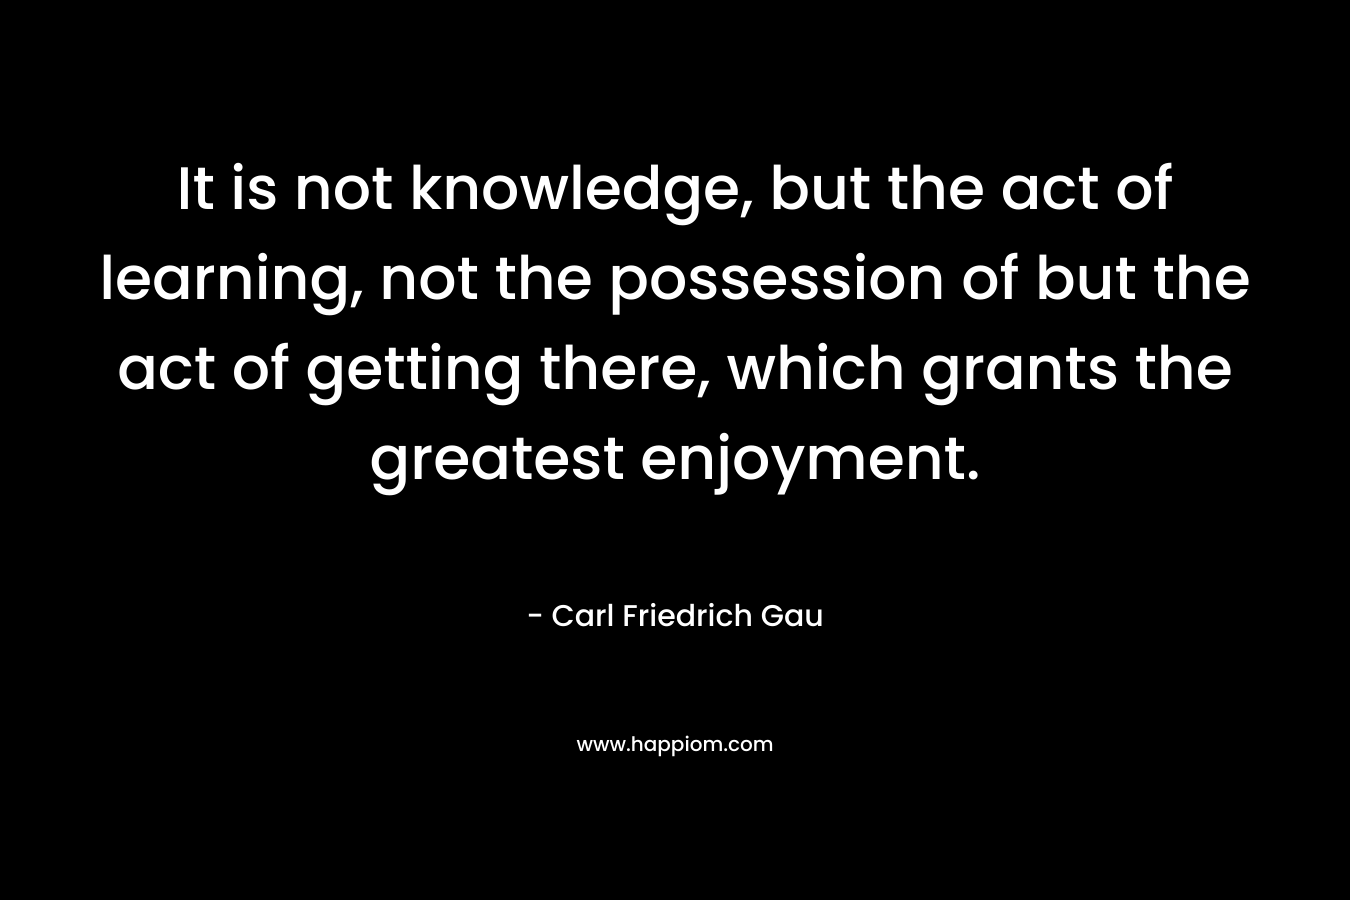 It is not knowledge, but the act of learning, not the possession of but the act of getting there, which grants the greatest enjoyment.